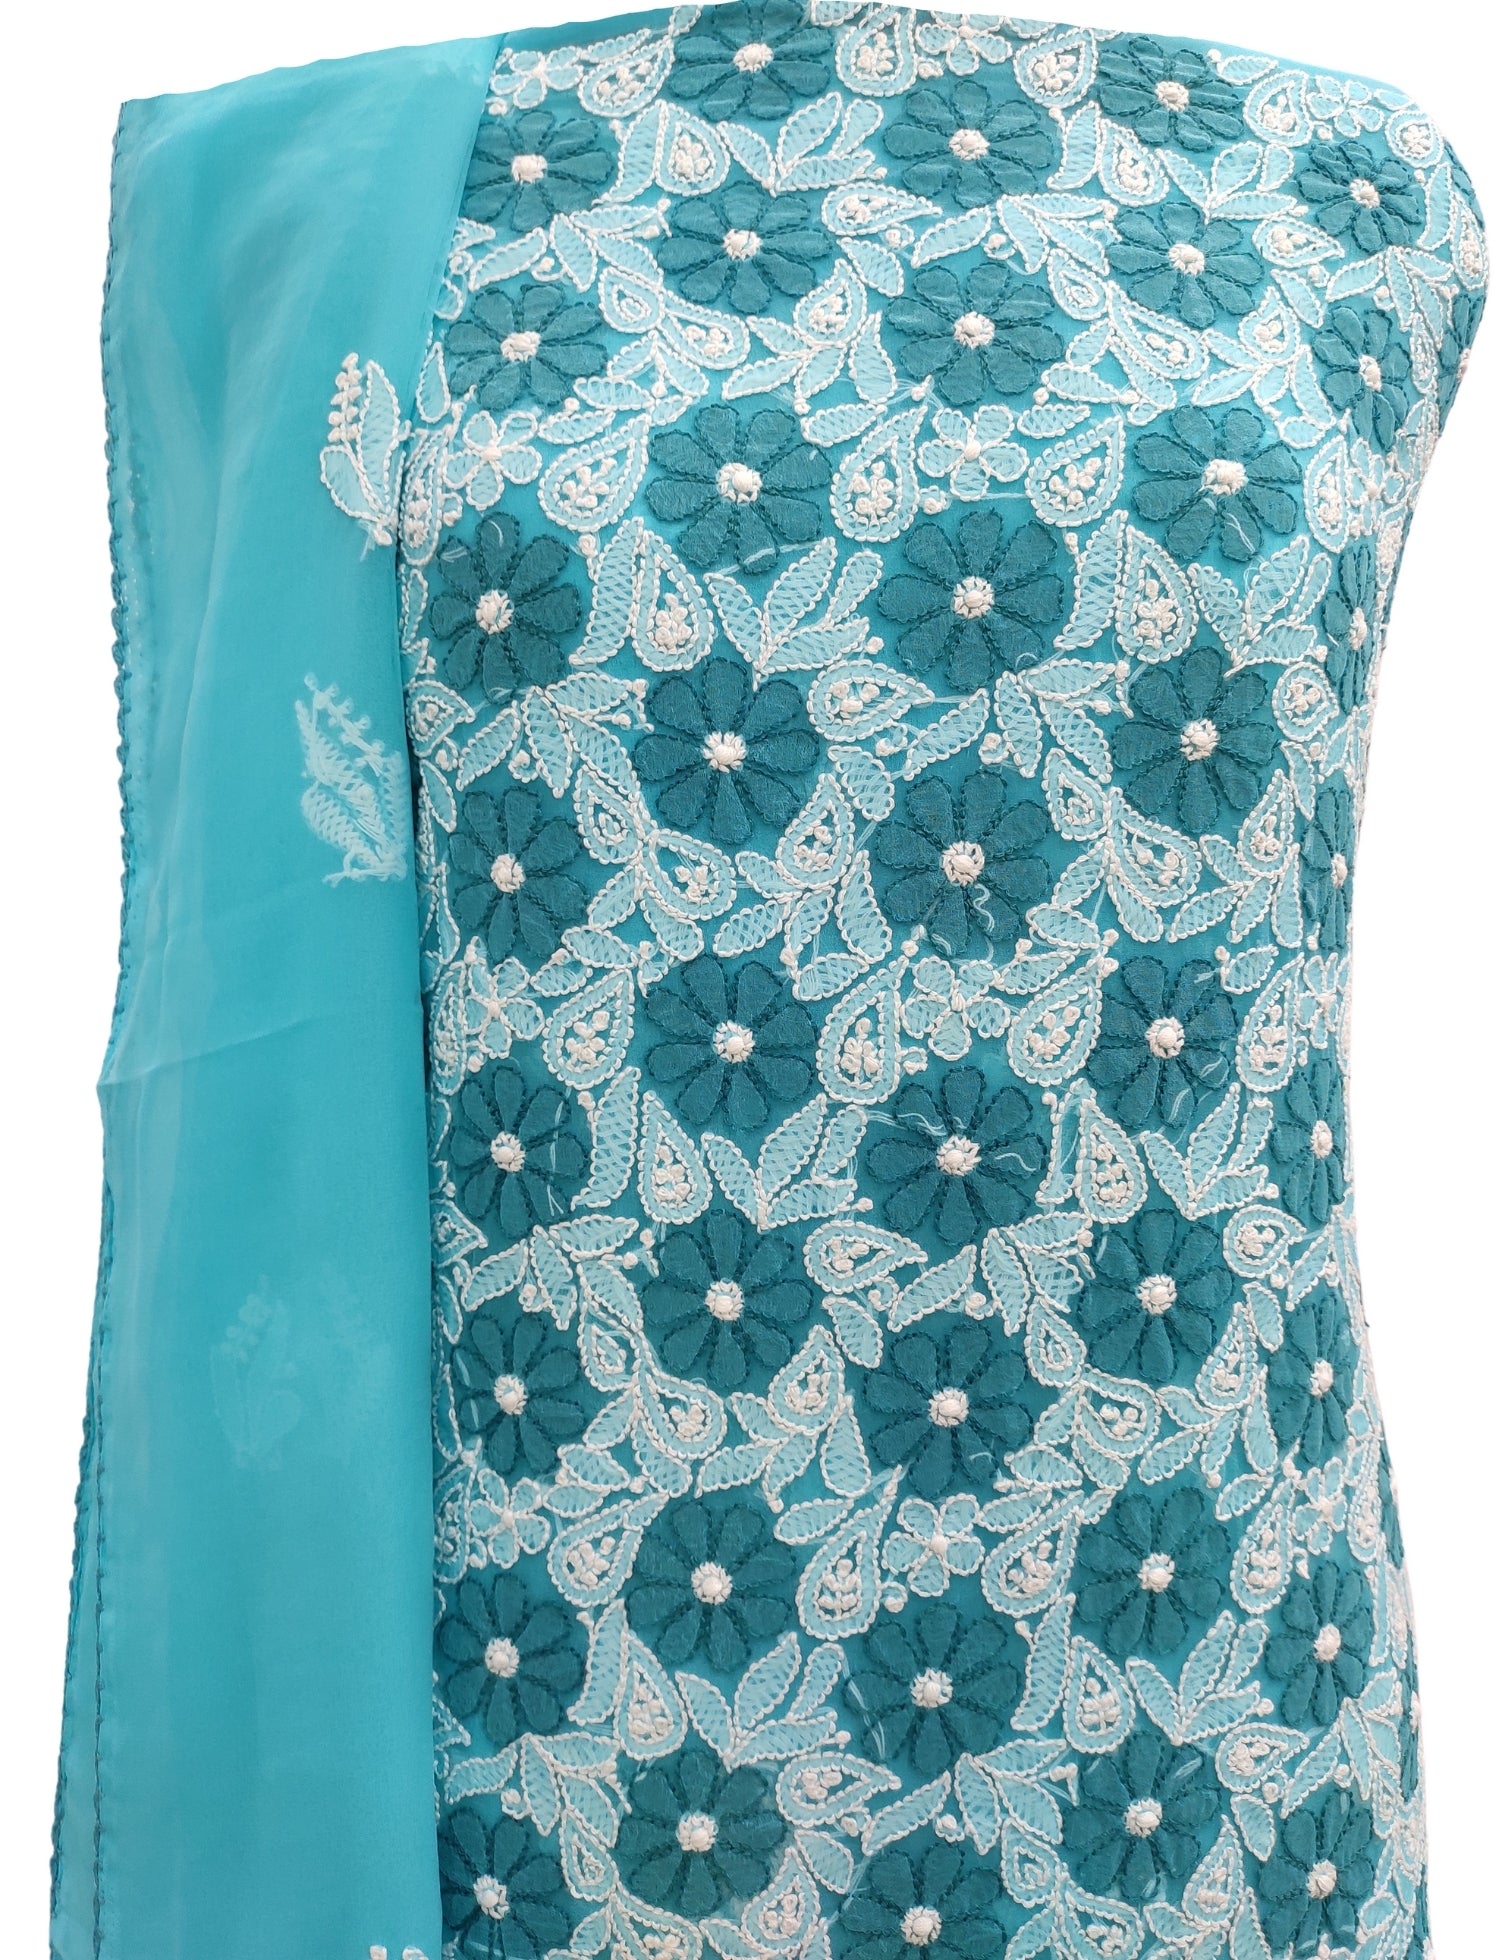 Shyamal Chikan Hand Embroidered Blue Georgette Lucknowi Chikankari Unstitched Suit Piece With Crosia Work - S10742 - Shyamal Chikan